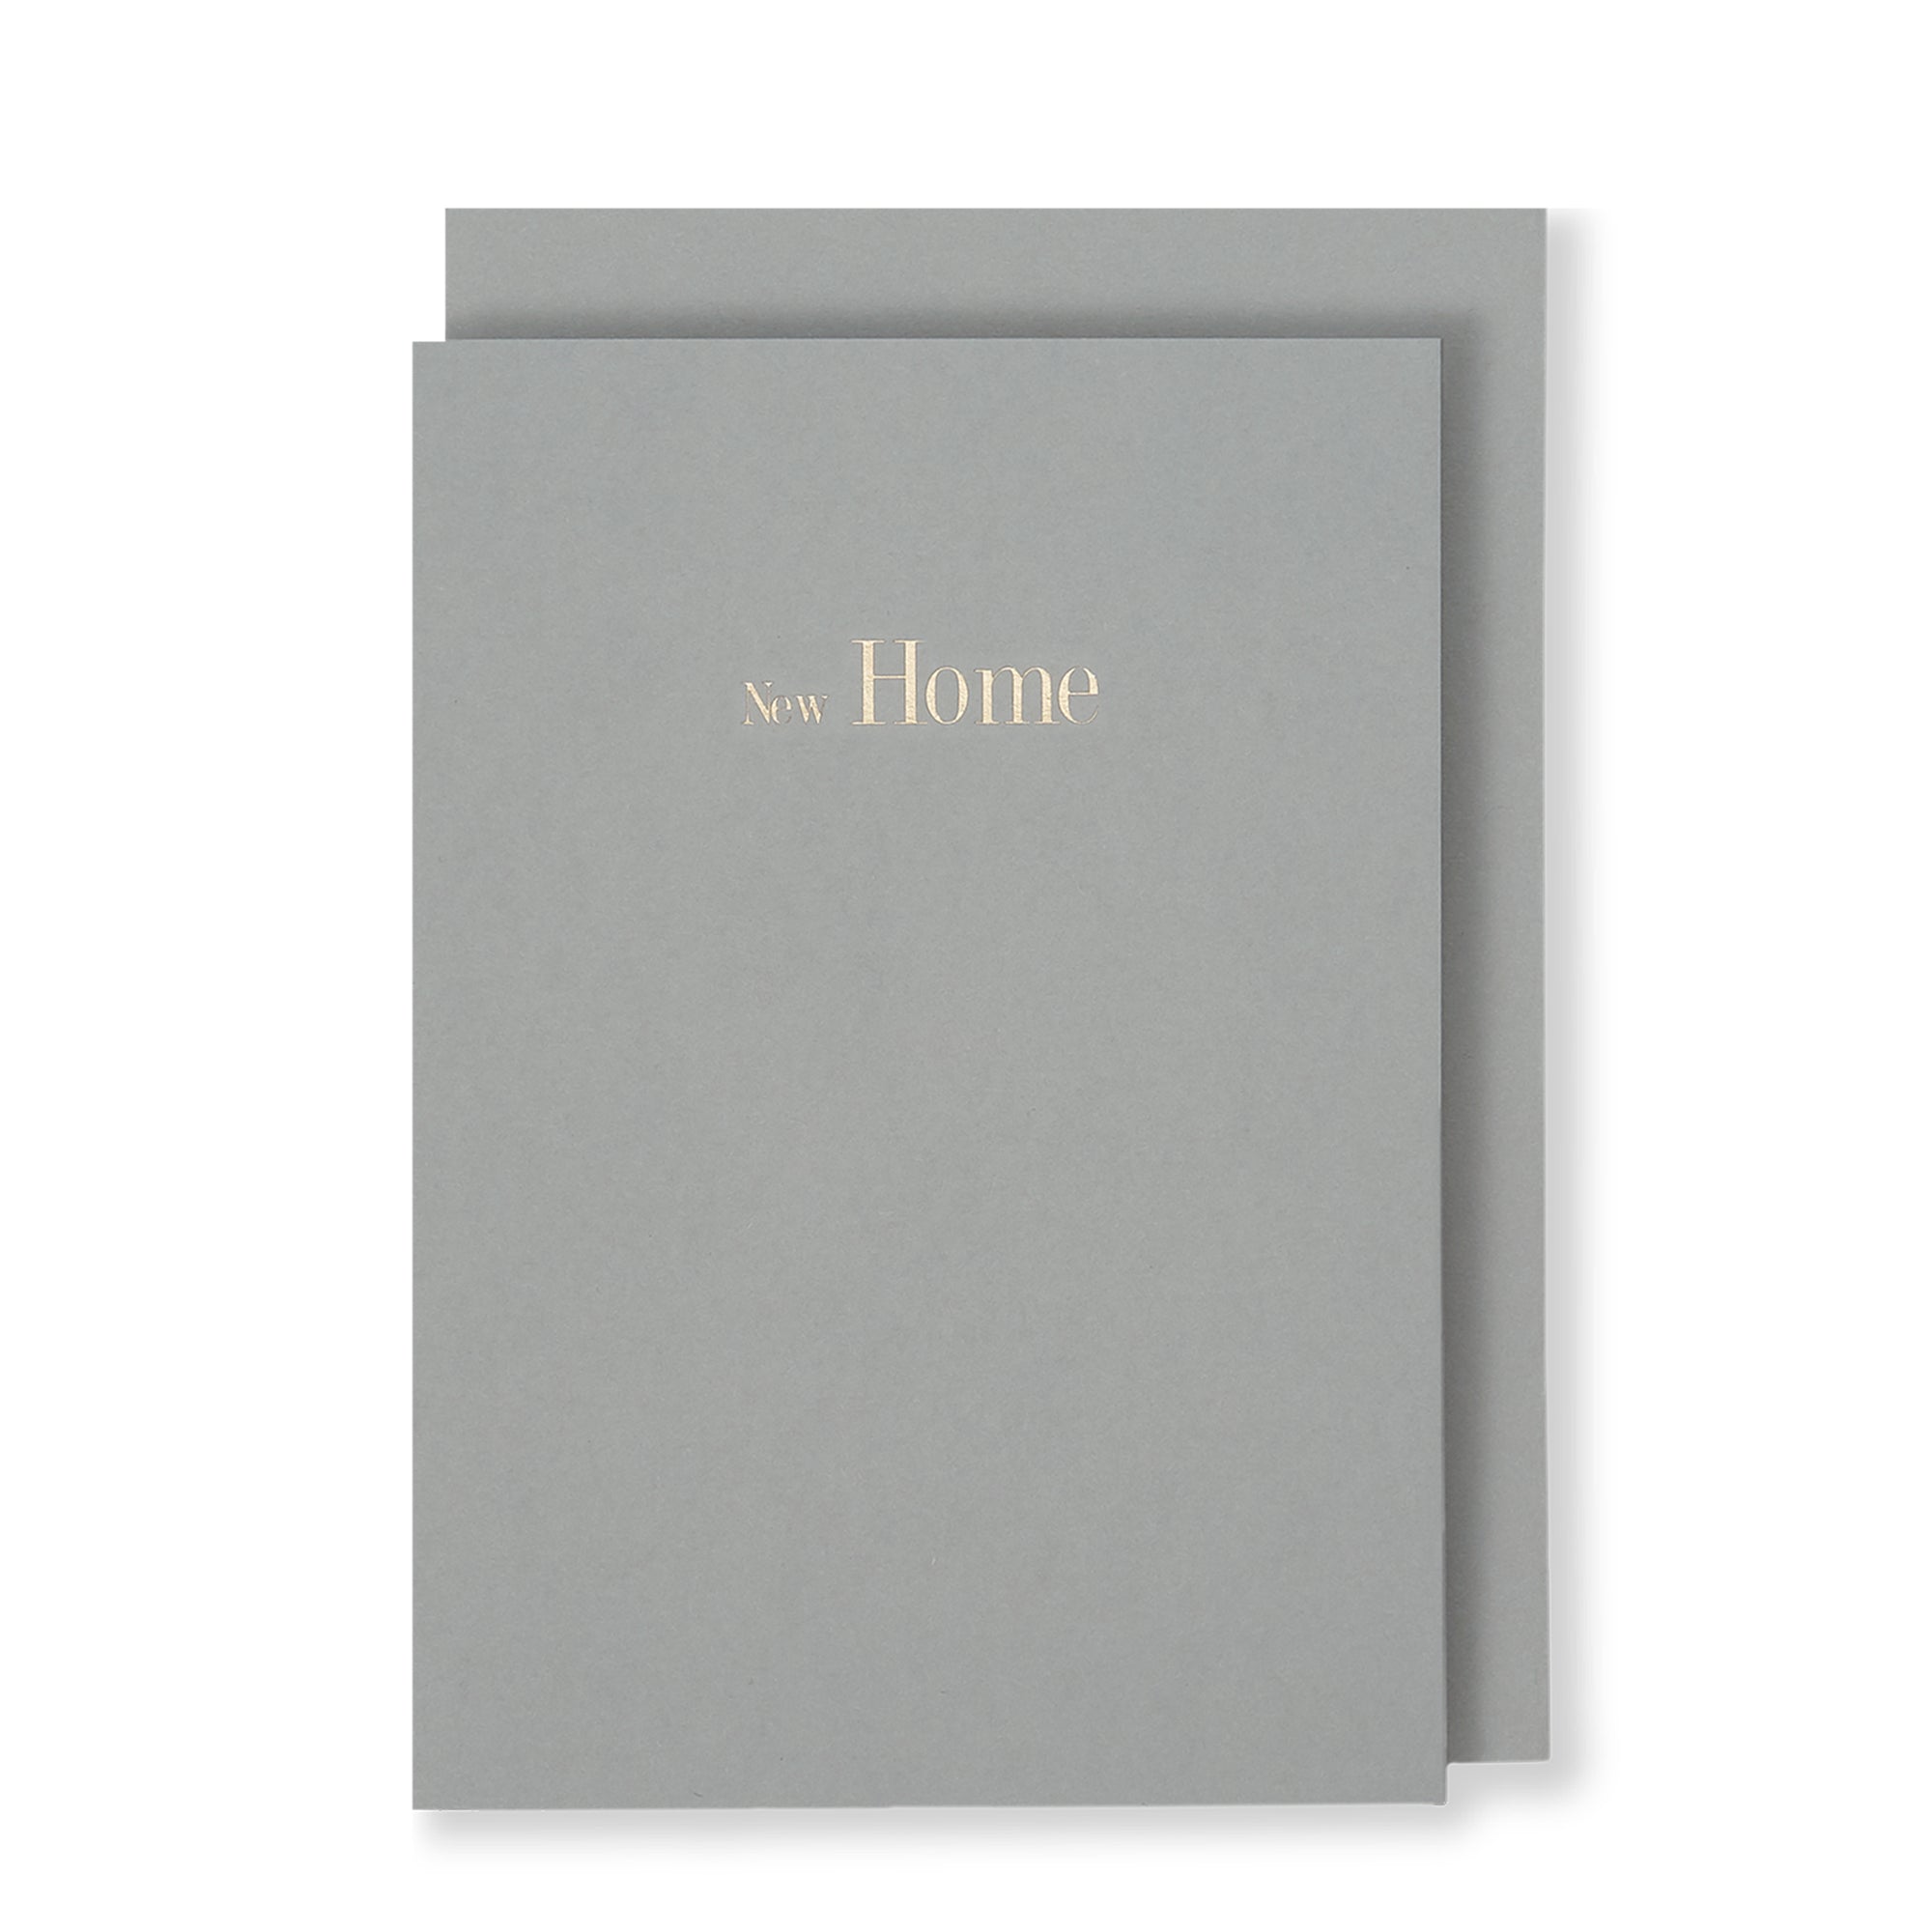 New Home Greeting Card in Grey, Front